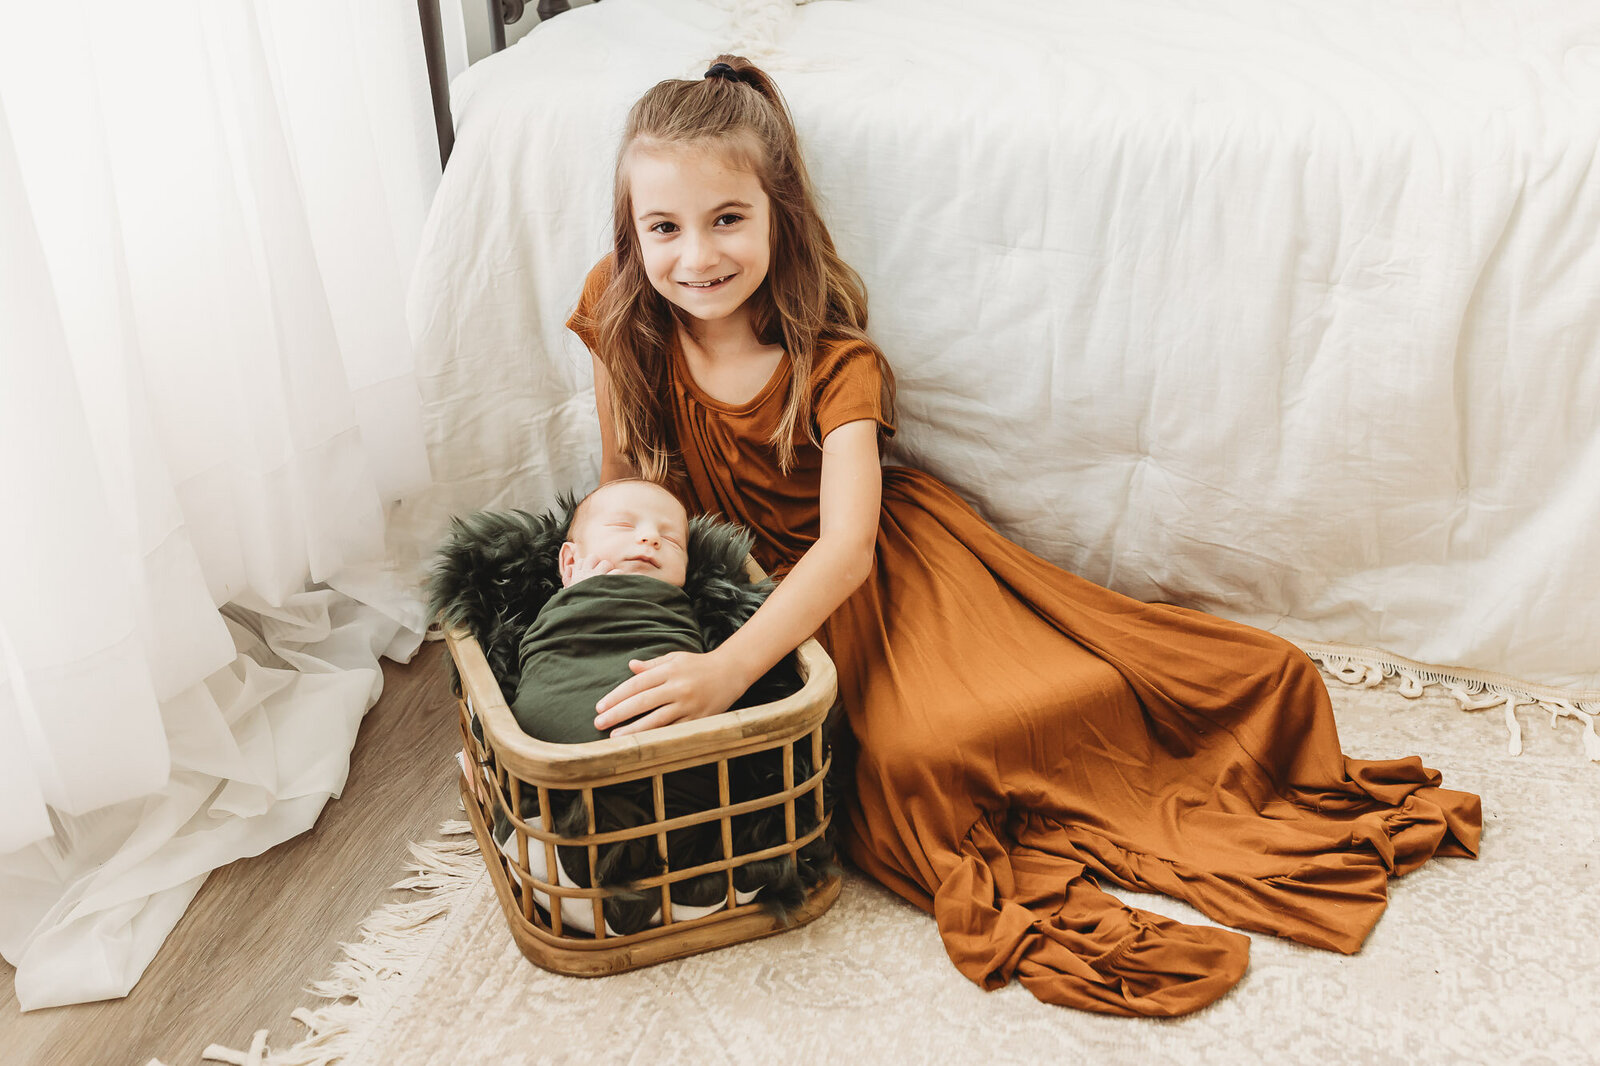 Big sibling in a copper colored dress laying next to baby brother who is wrapped in an olive green swaddle in a basket